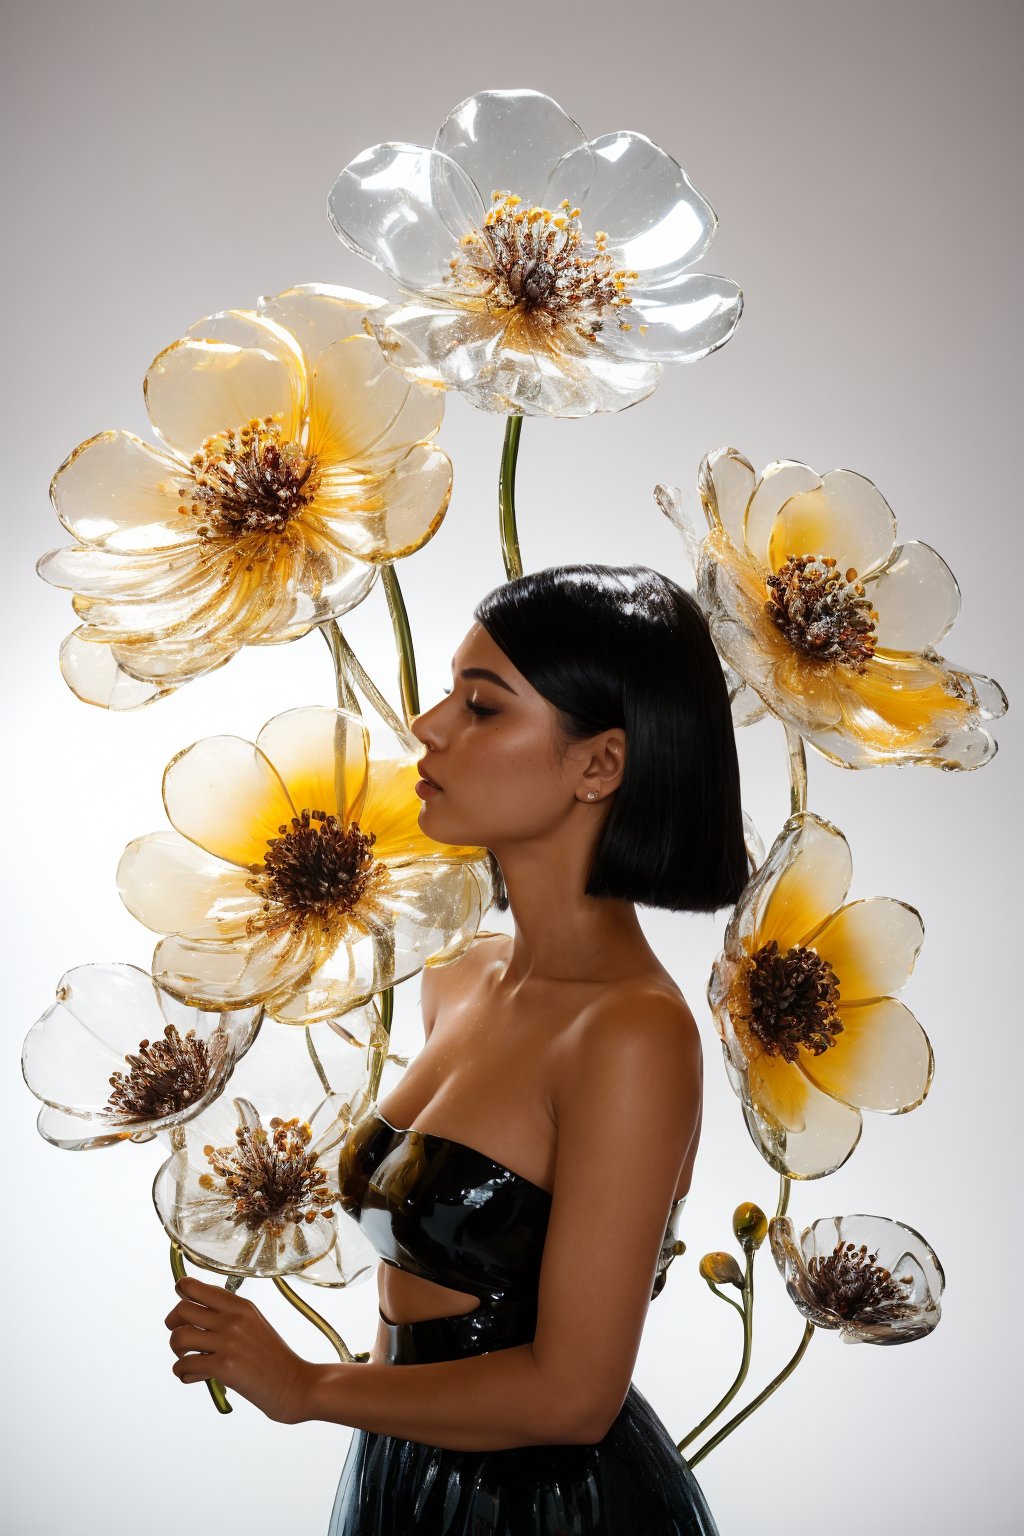 dark room studio portrait, black back drop, black room, darkroom, dimmed environment, a side portrait of an attractive blonde hair tanned woman surrounded by flowers made of glass, olive skin, glowing skin, tanned lines, wearing a elegnat dress made of transparent glass flowers, transparent flower, glass flower, filled with flowers, full of flowers, flower bed (close up shot 1:1) alluring pose, glass statue, attractive pose, epic pose, shot from below, perspective view, dynamic angle, dynamic pose, fashion editorial photography, master piece, hyper realistic, real skin, natural light, wall made of glass flowers, wall filled with flowers made of glass, dreamy, surreal, enchanting, back lit photography, dramatic lighting, high contrast, studio photography, portrait photography, intimate, super closeup shot,  focused on subject, desaturated, artistic, pop art, sophisticated pose, back light silhouette photography, art photography, avant garde fashion photography, macro lens photography, gigantic transparent glass flowers, monumental scale, giant flower sculptures